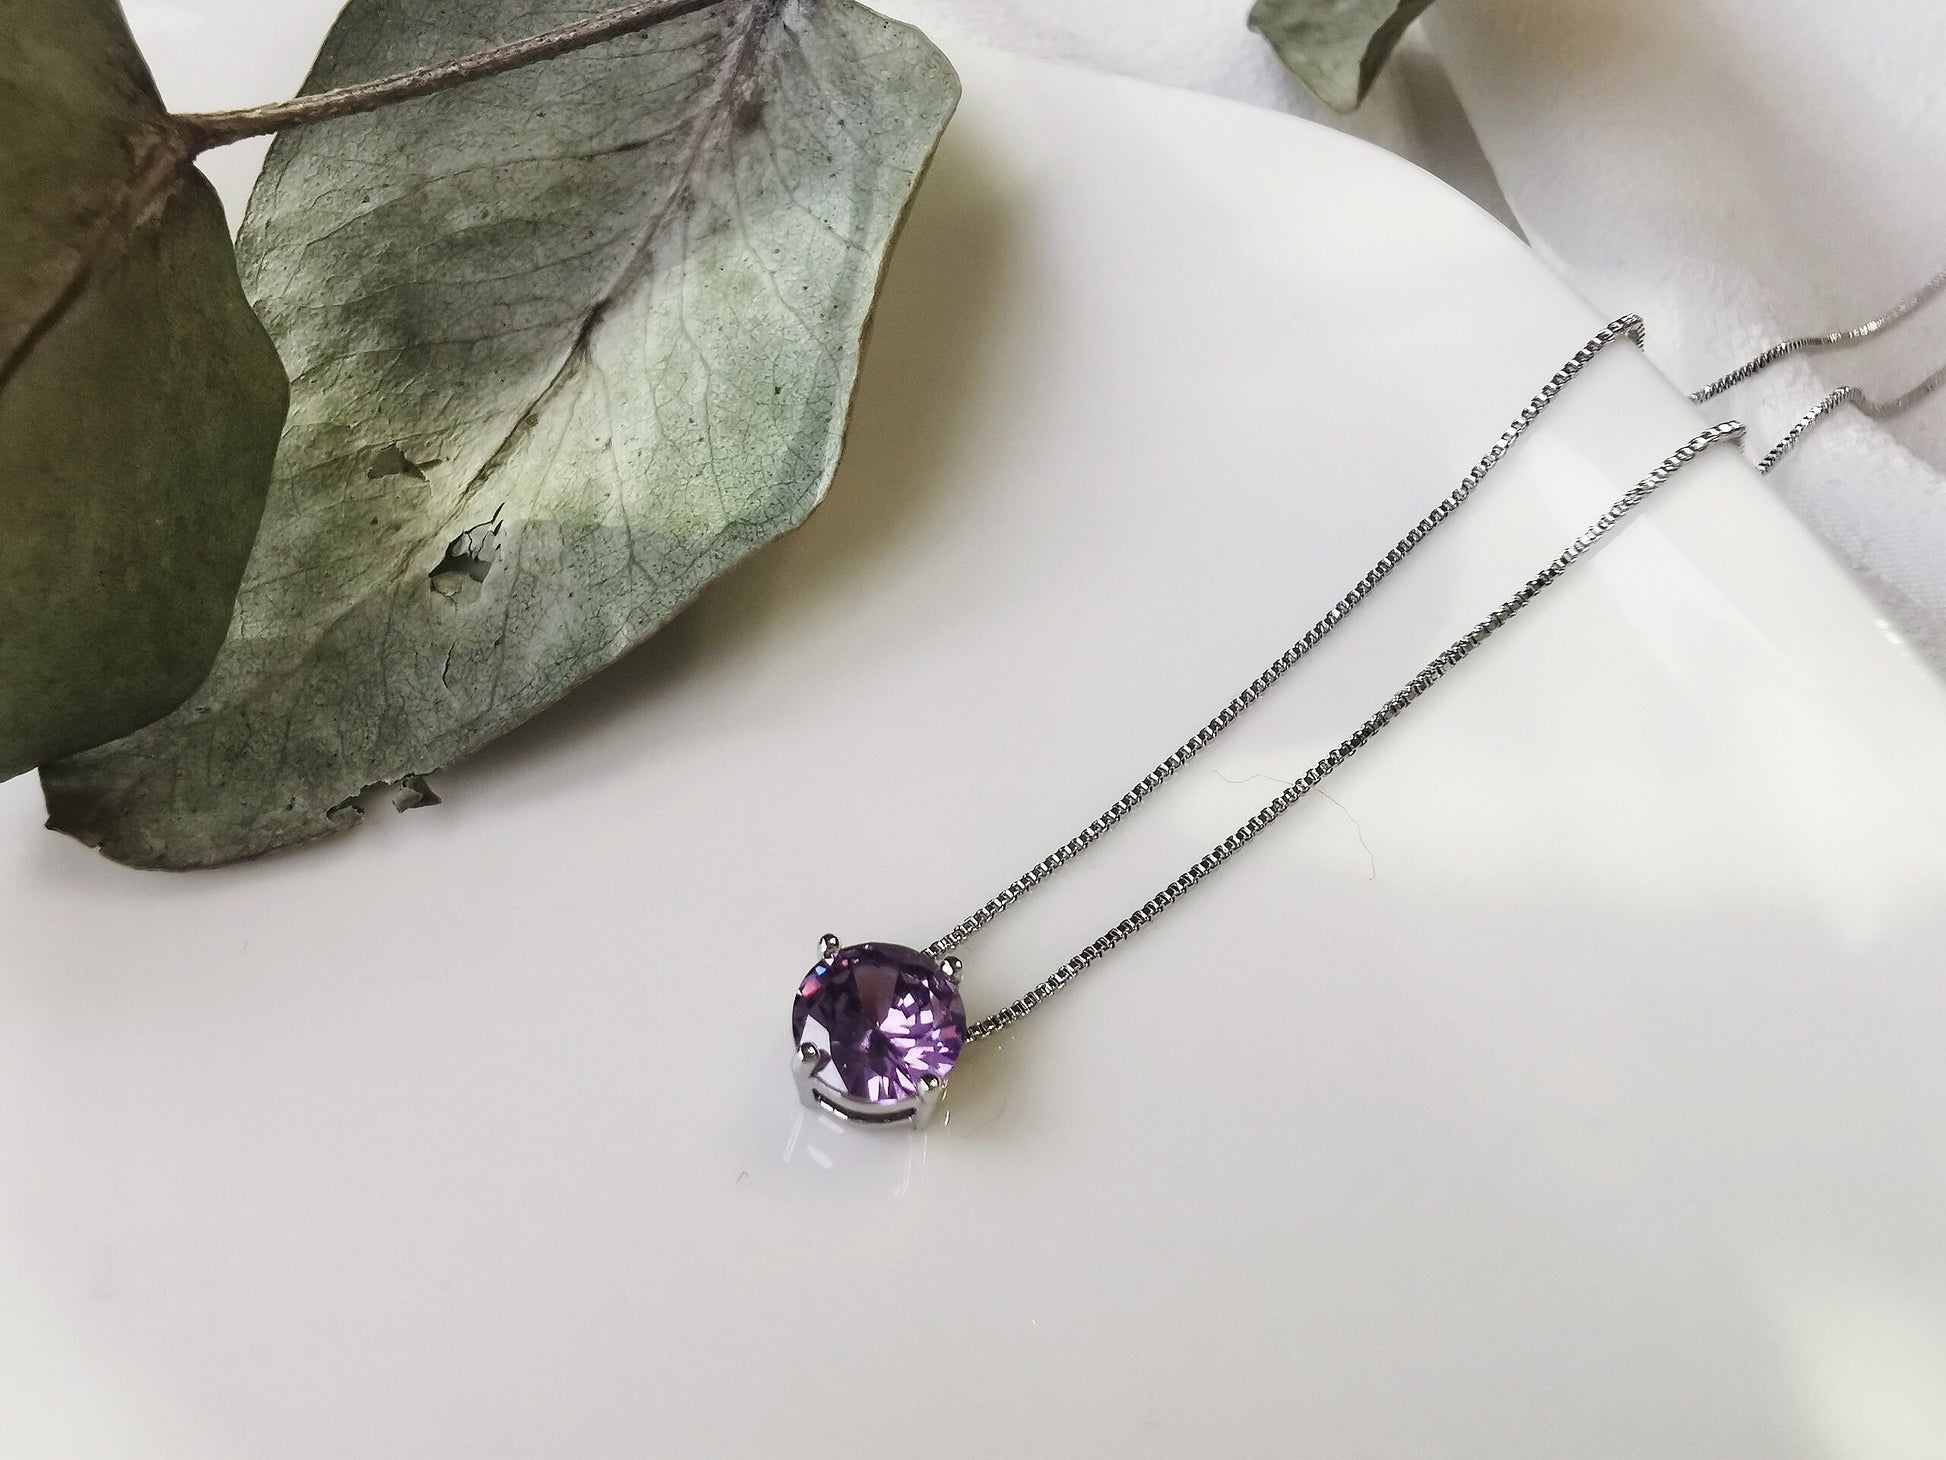 February Birthstone Necklace, White Gold Plated, Amethyst Crystal Pendant Handcrafted with Swarovski® Crystals, Christmas Gift For Her